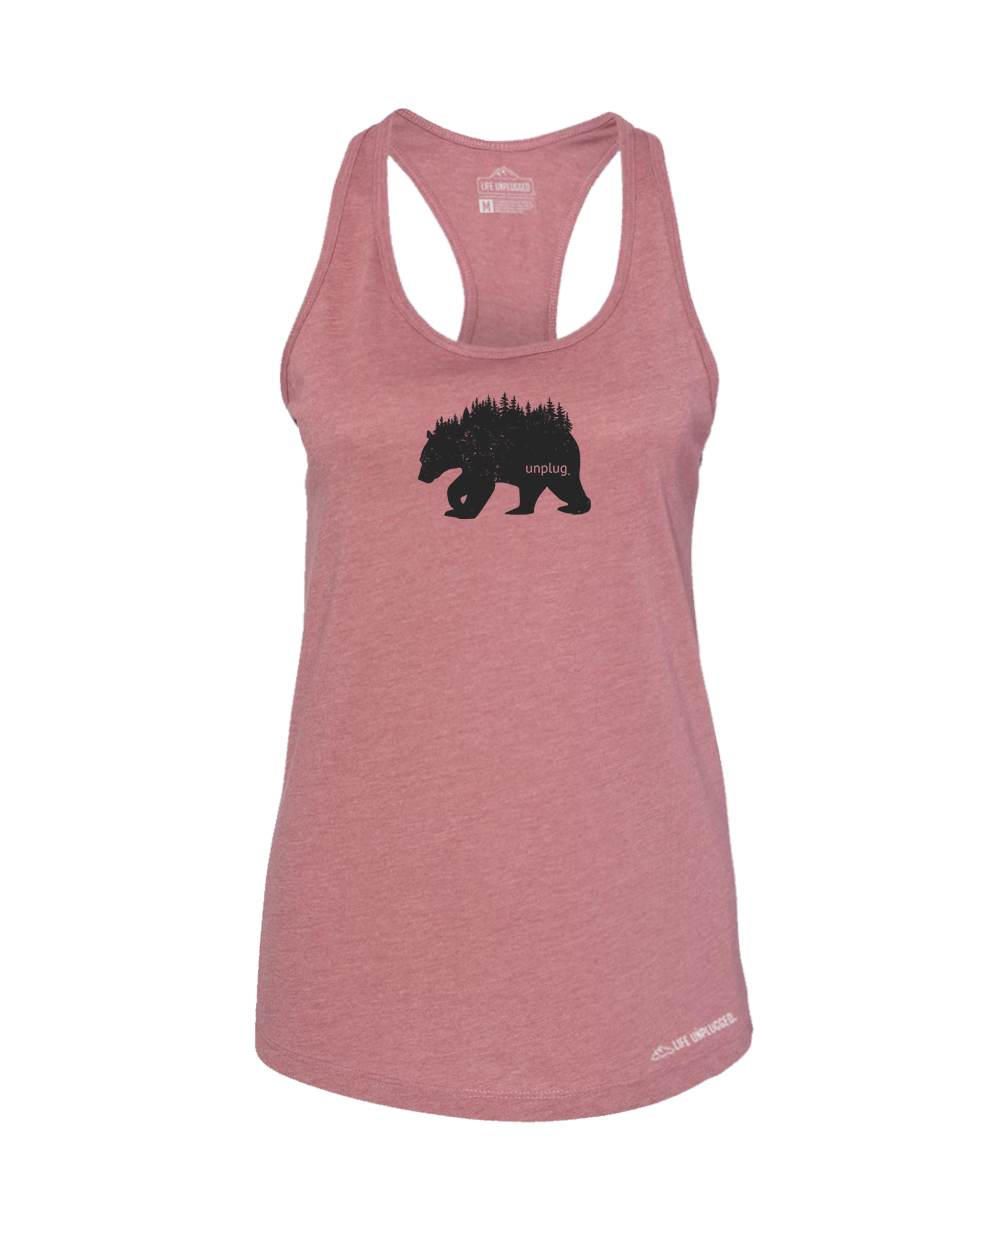 Bear In The Trees Premium Women's Relaxed Fit Racerback Tank Top